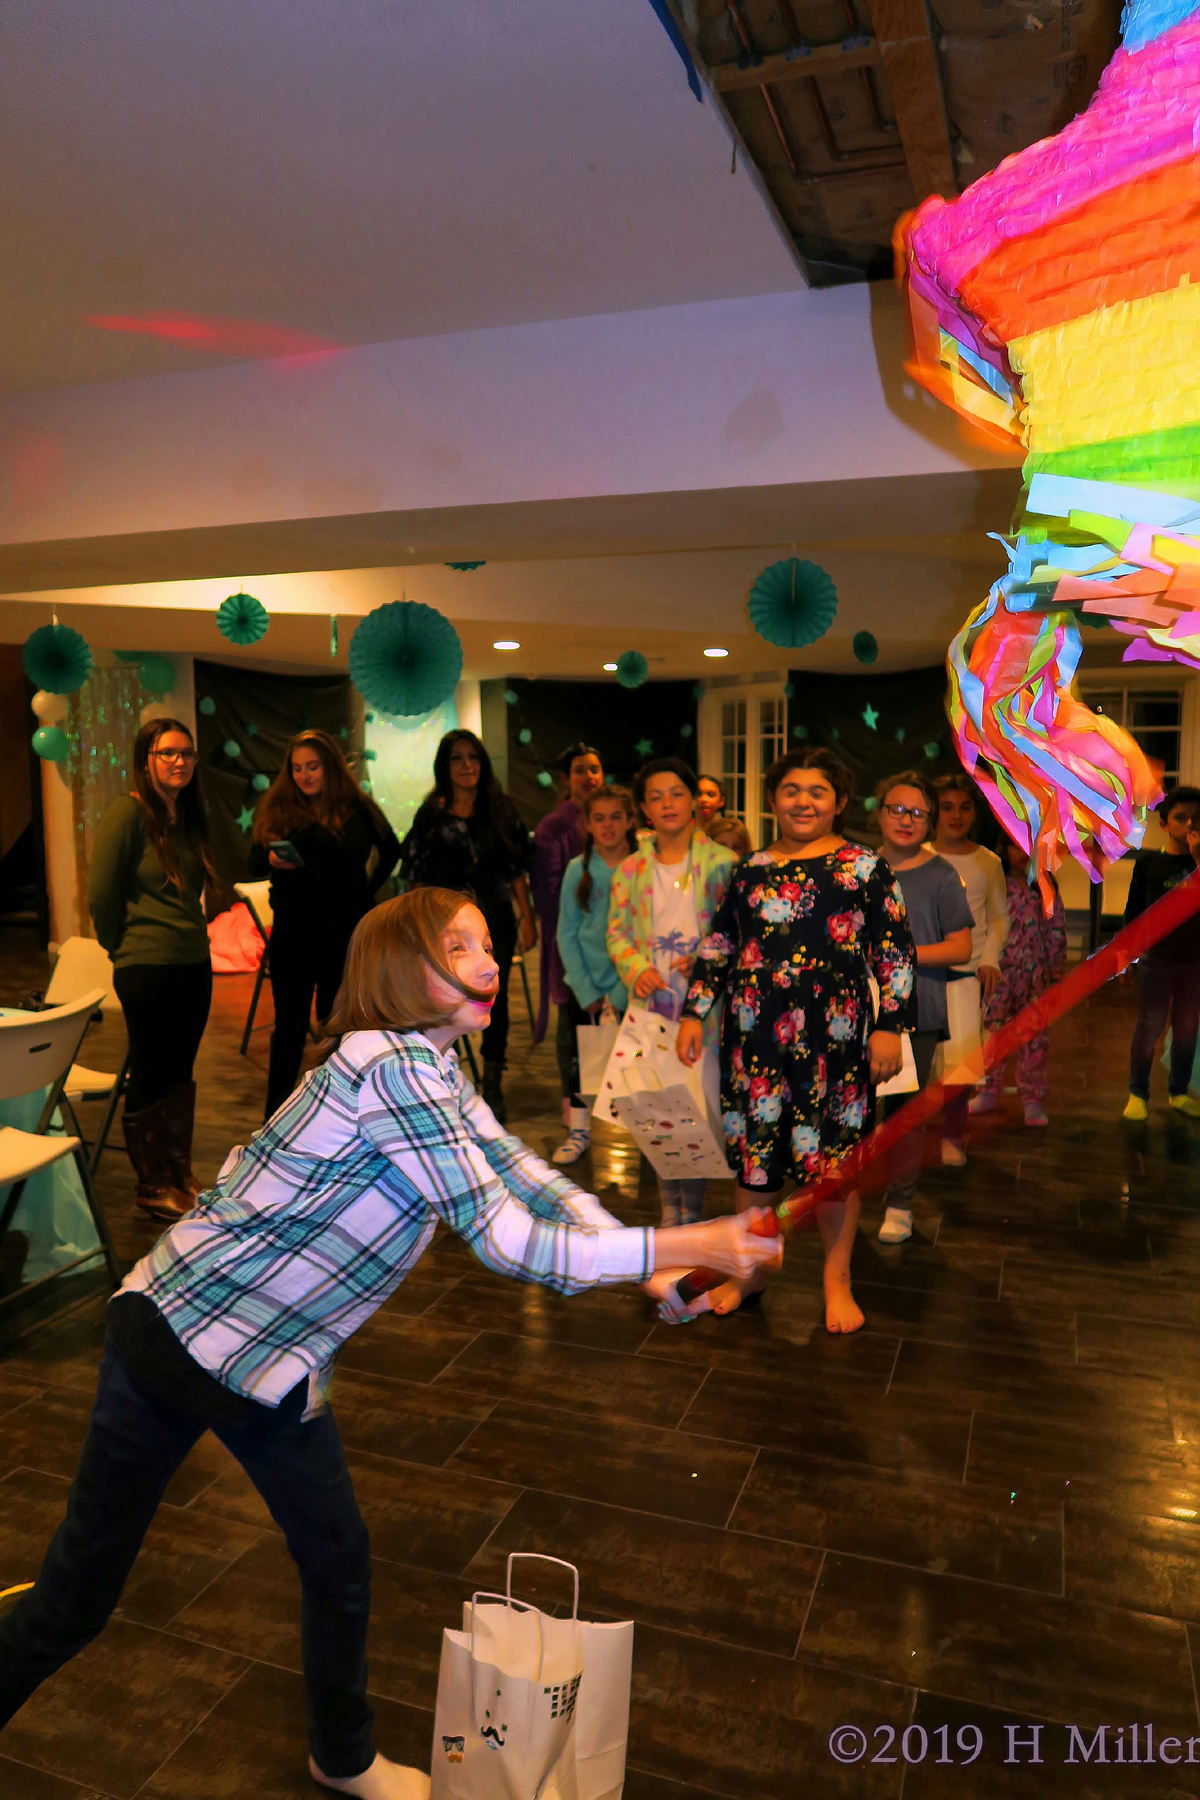 Pat It With A Stick! Pinata Fun At The Spa Party! 